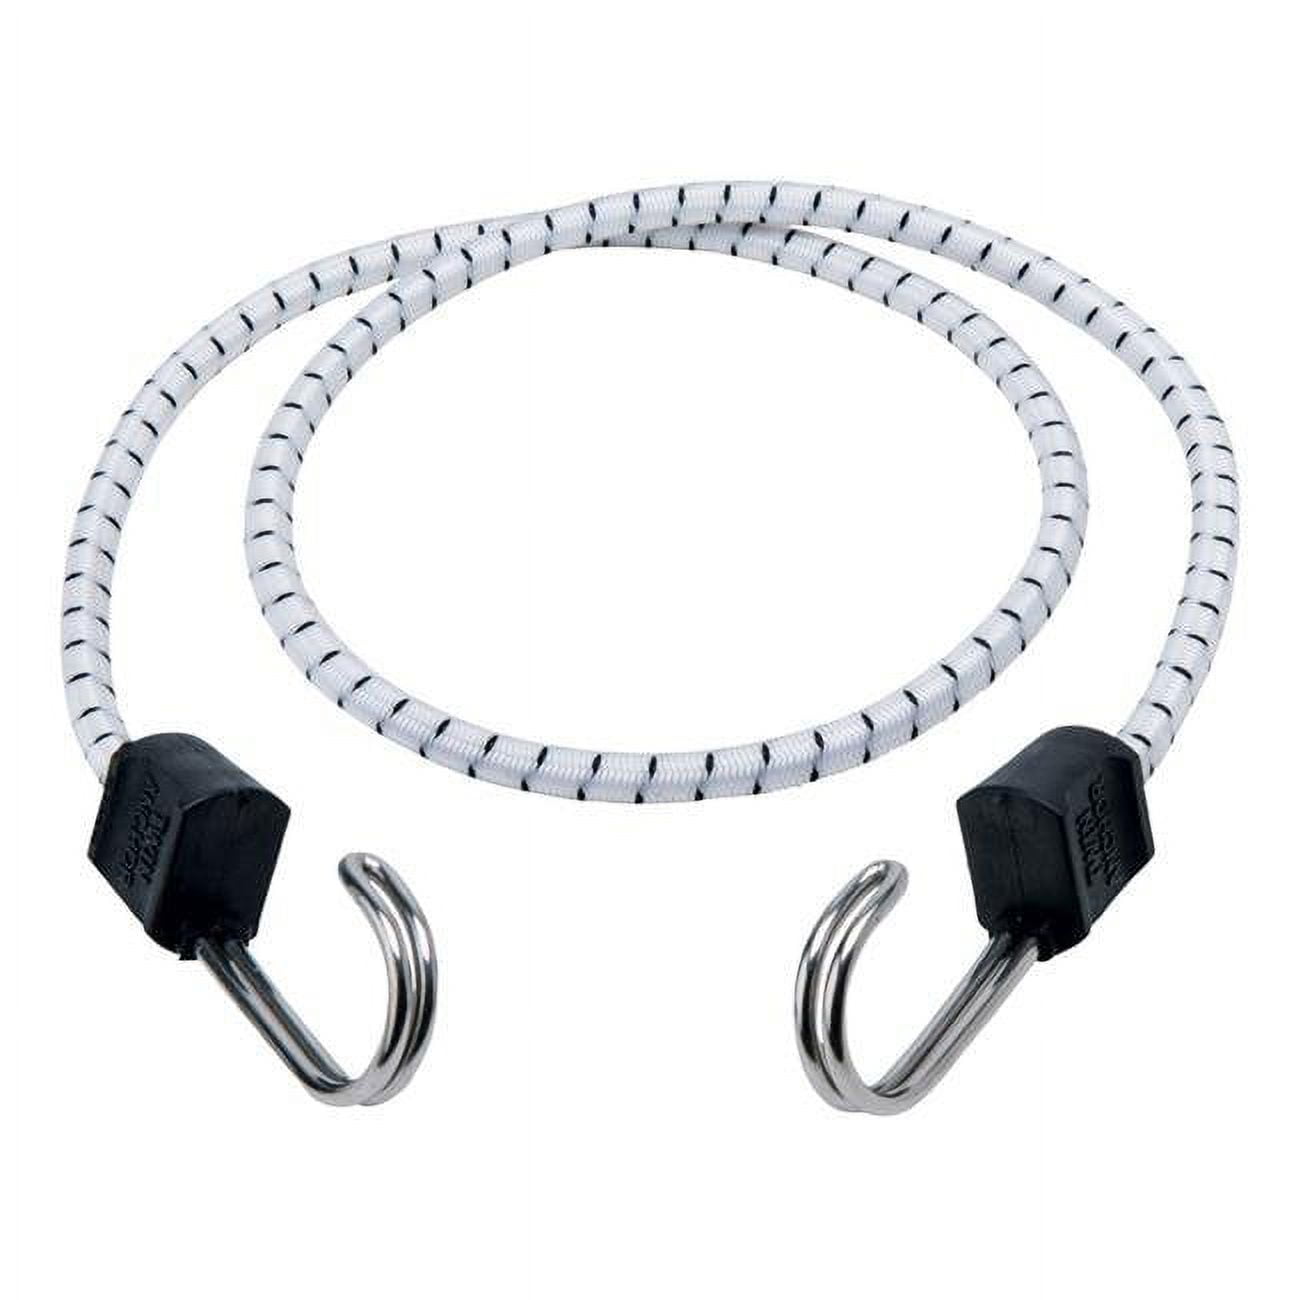 8866550 40 In. Marine Twin Anchor Bungee Cord, White & Black - Pack Of 10